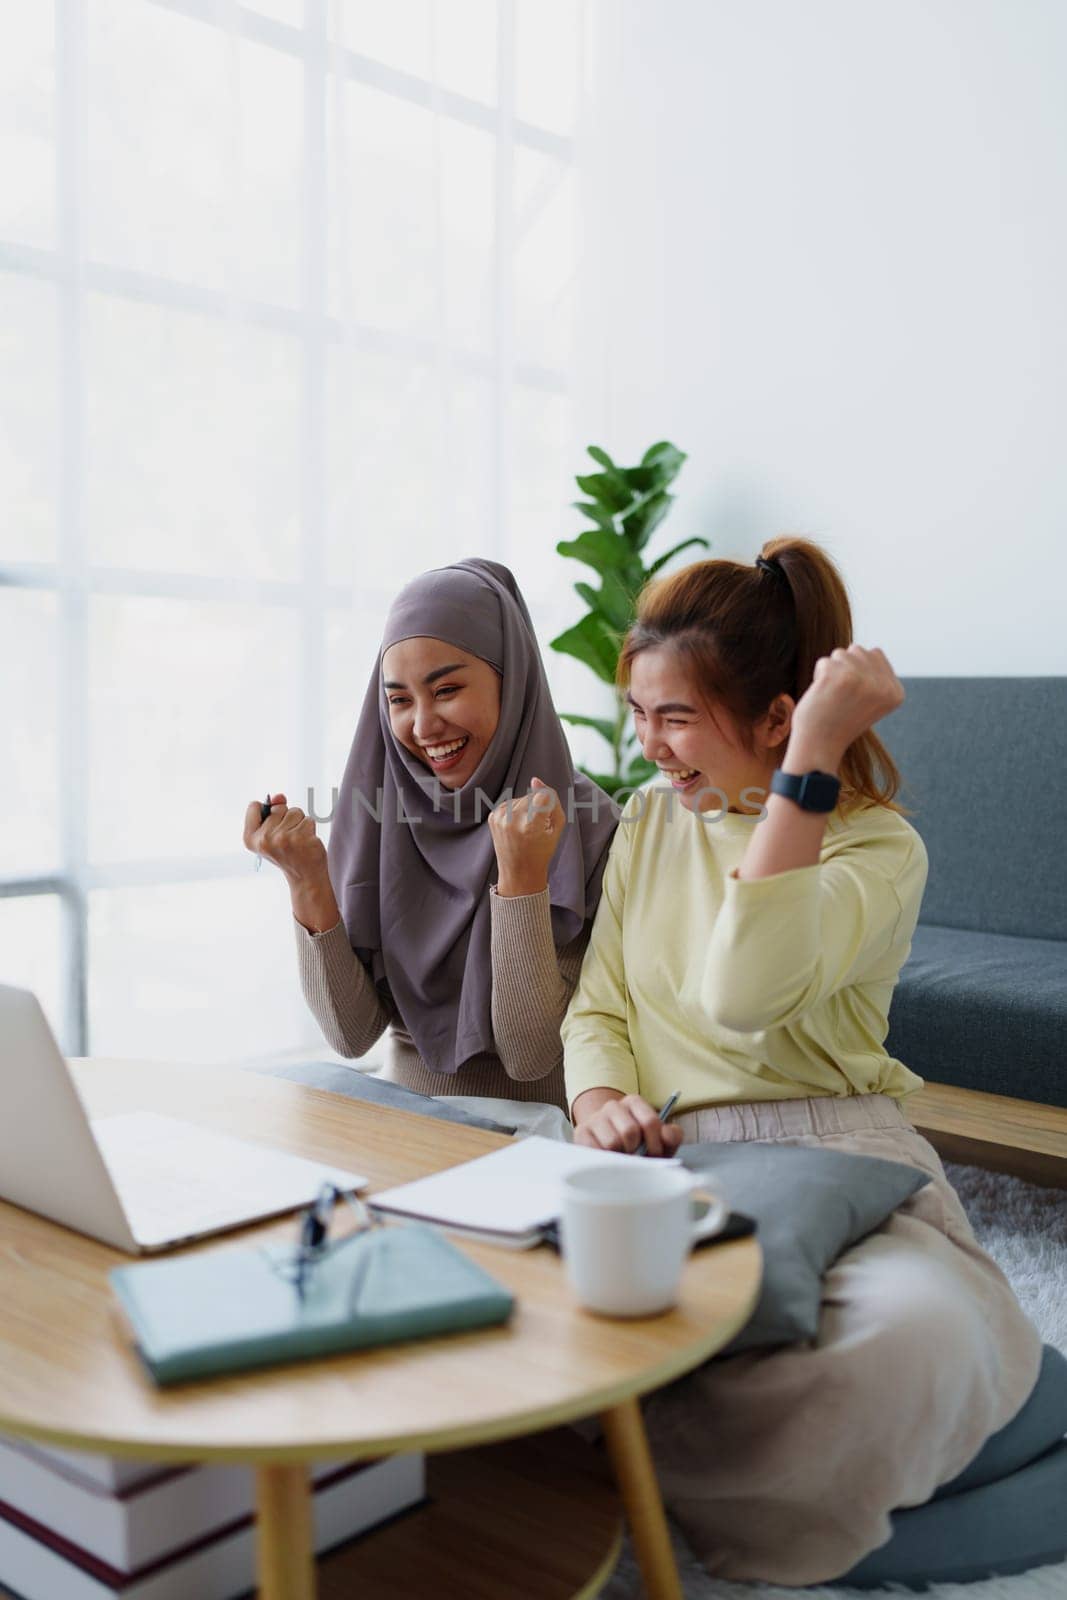 Muslim undergraduate students and Asian women express their joy after completing online study using a computer. by Manastrong